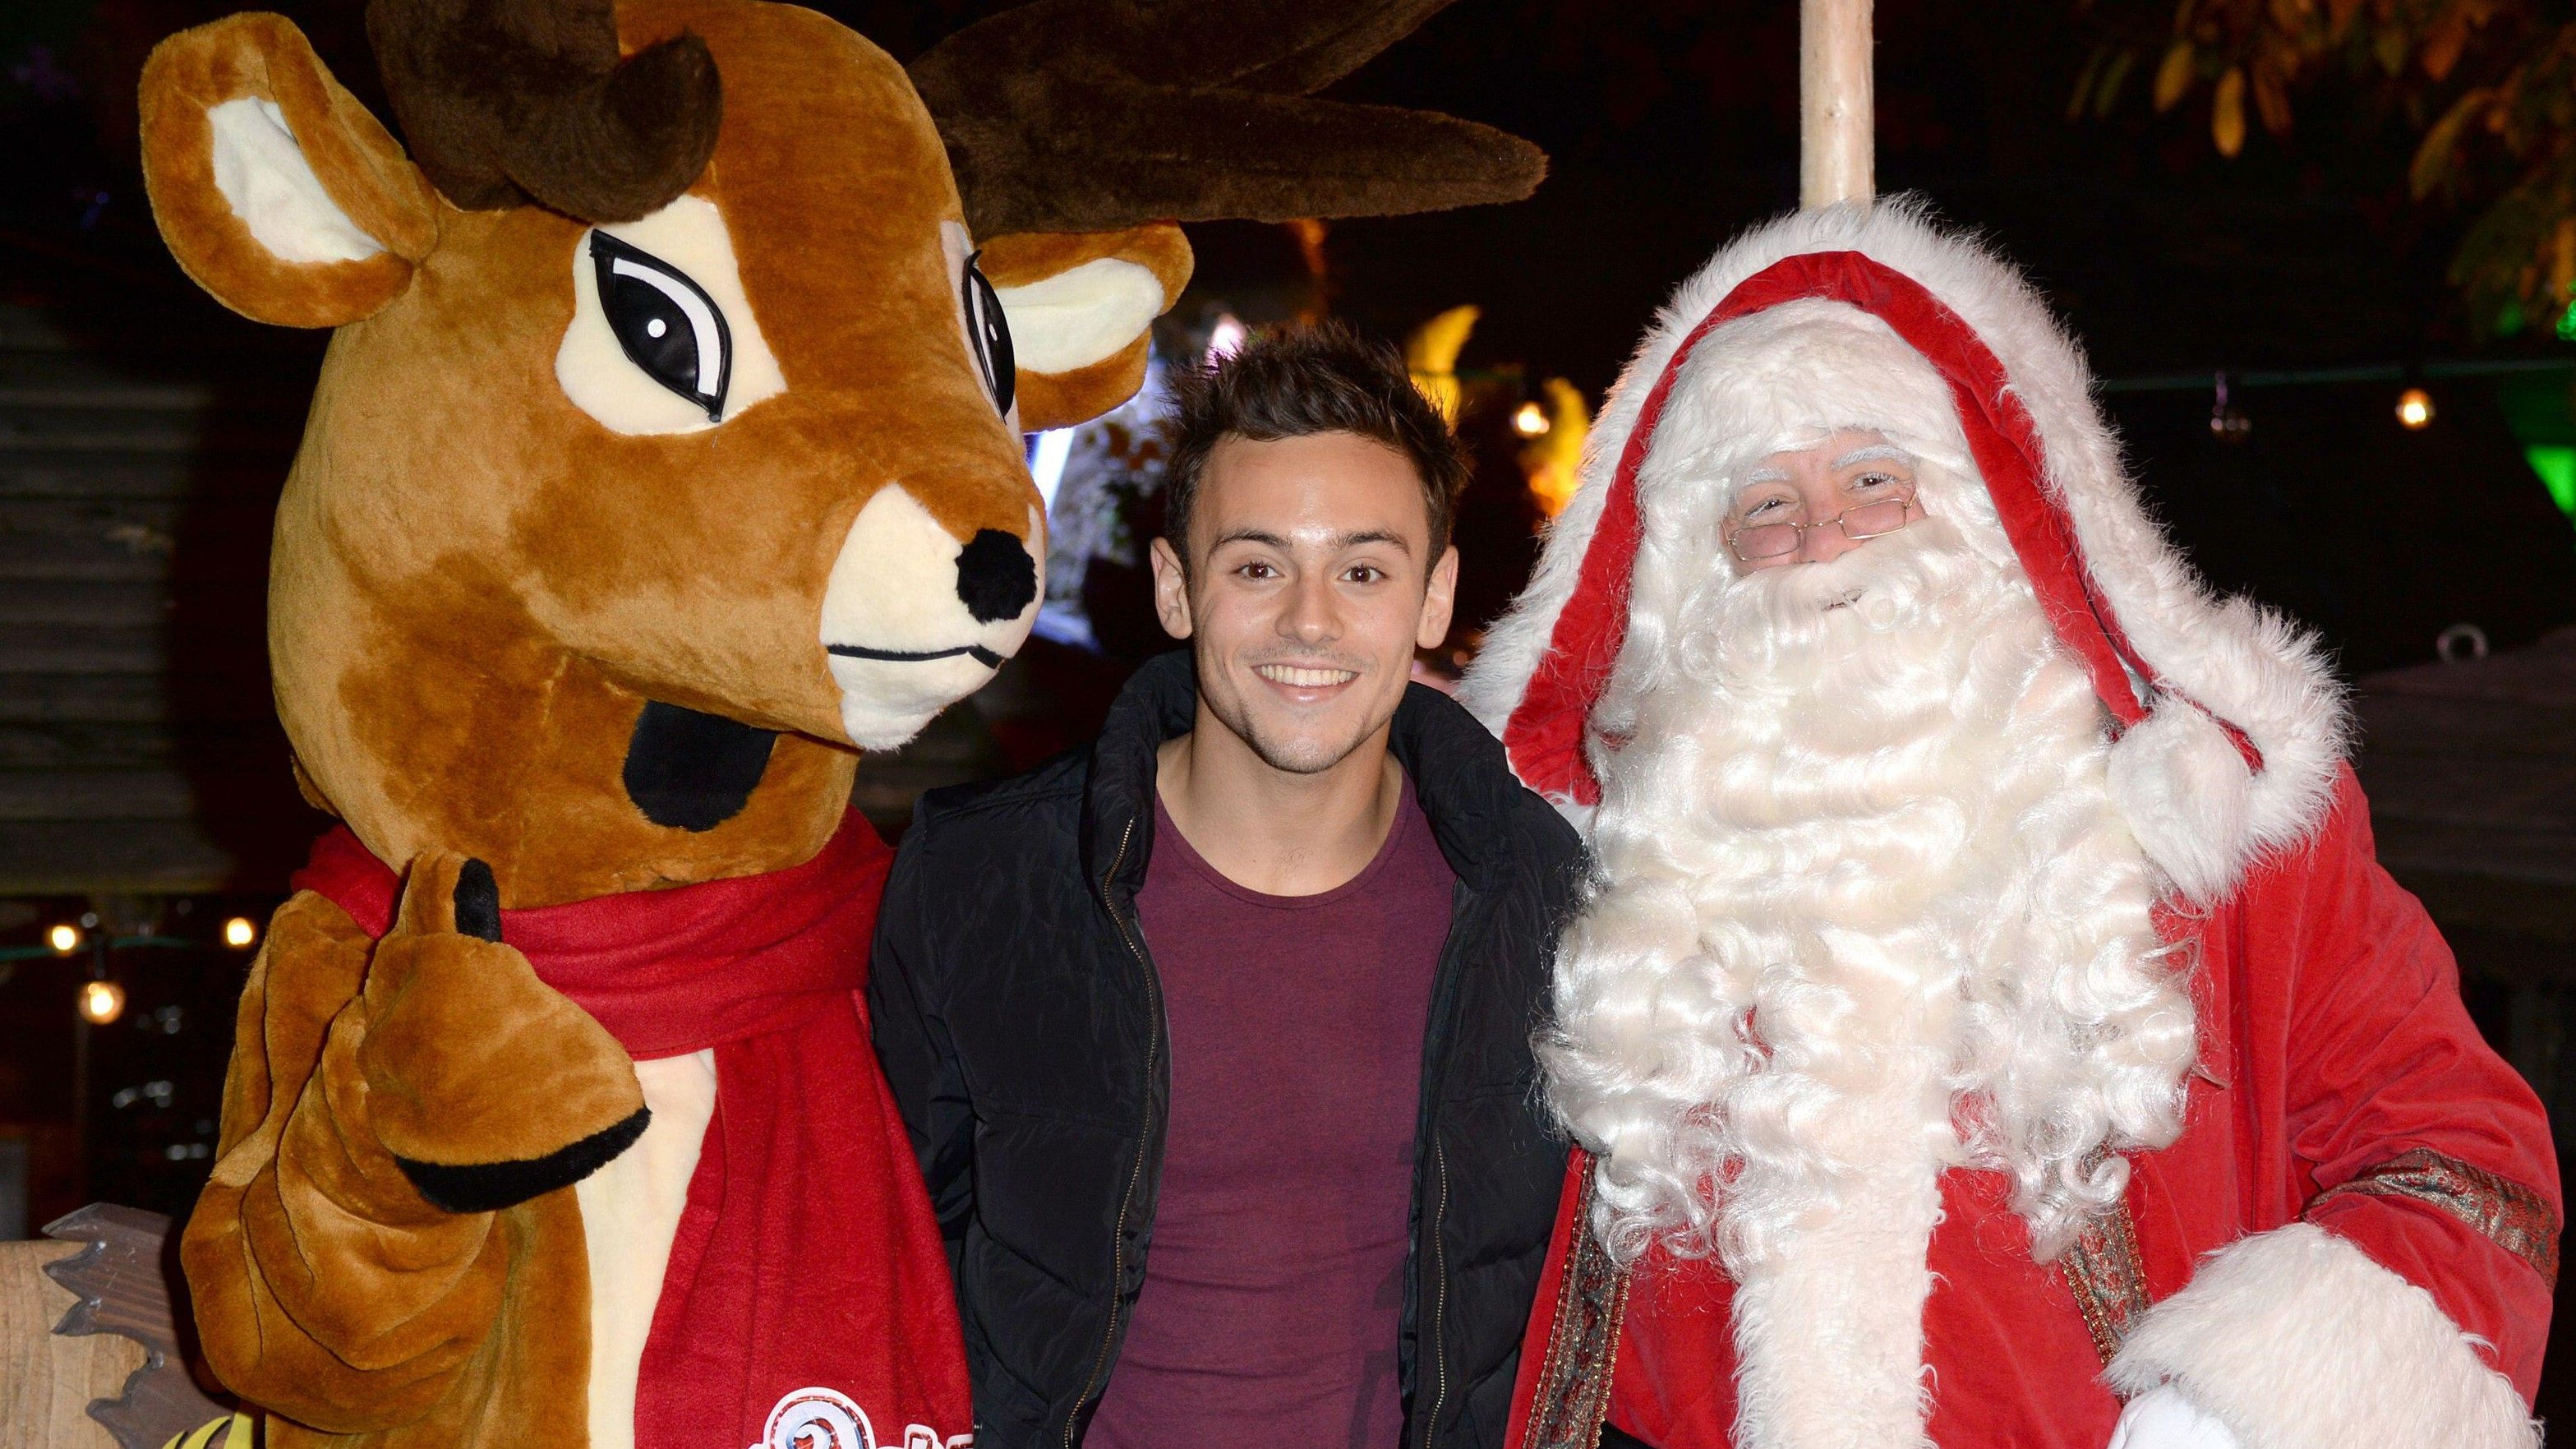 Tom Daley to deliver alternative Christmas message